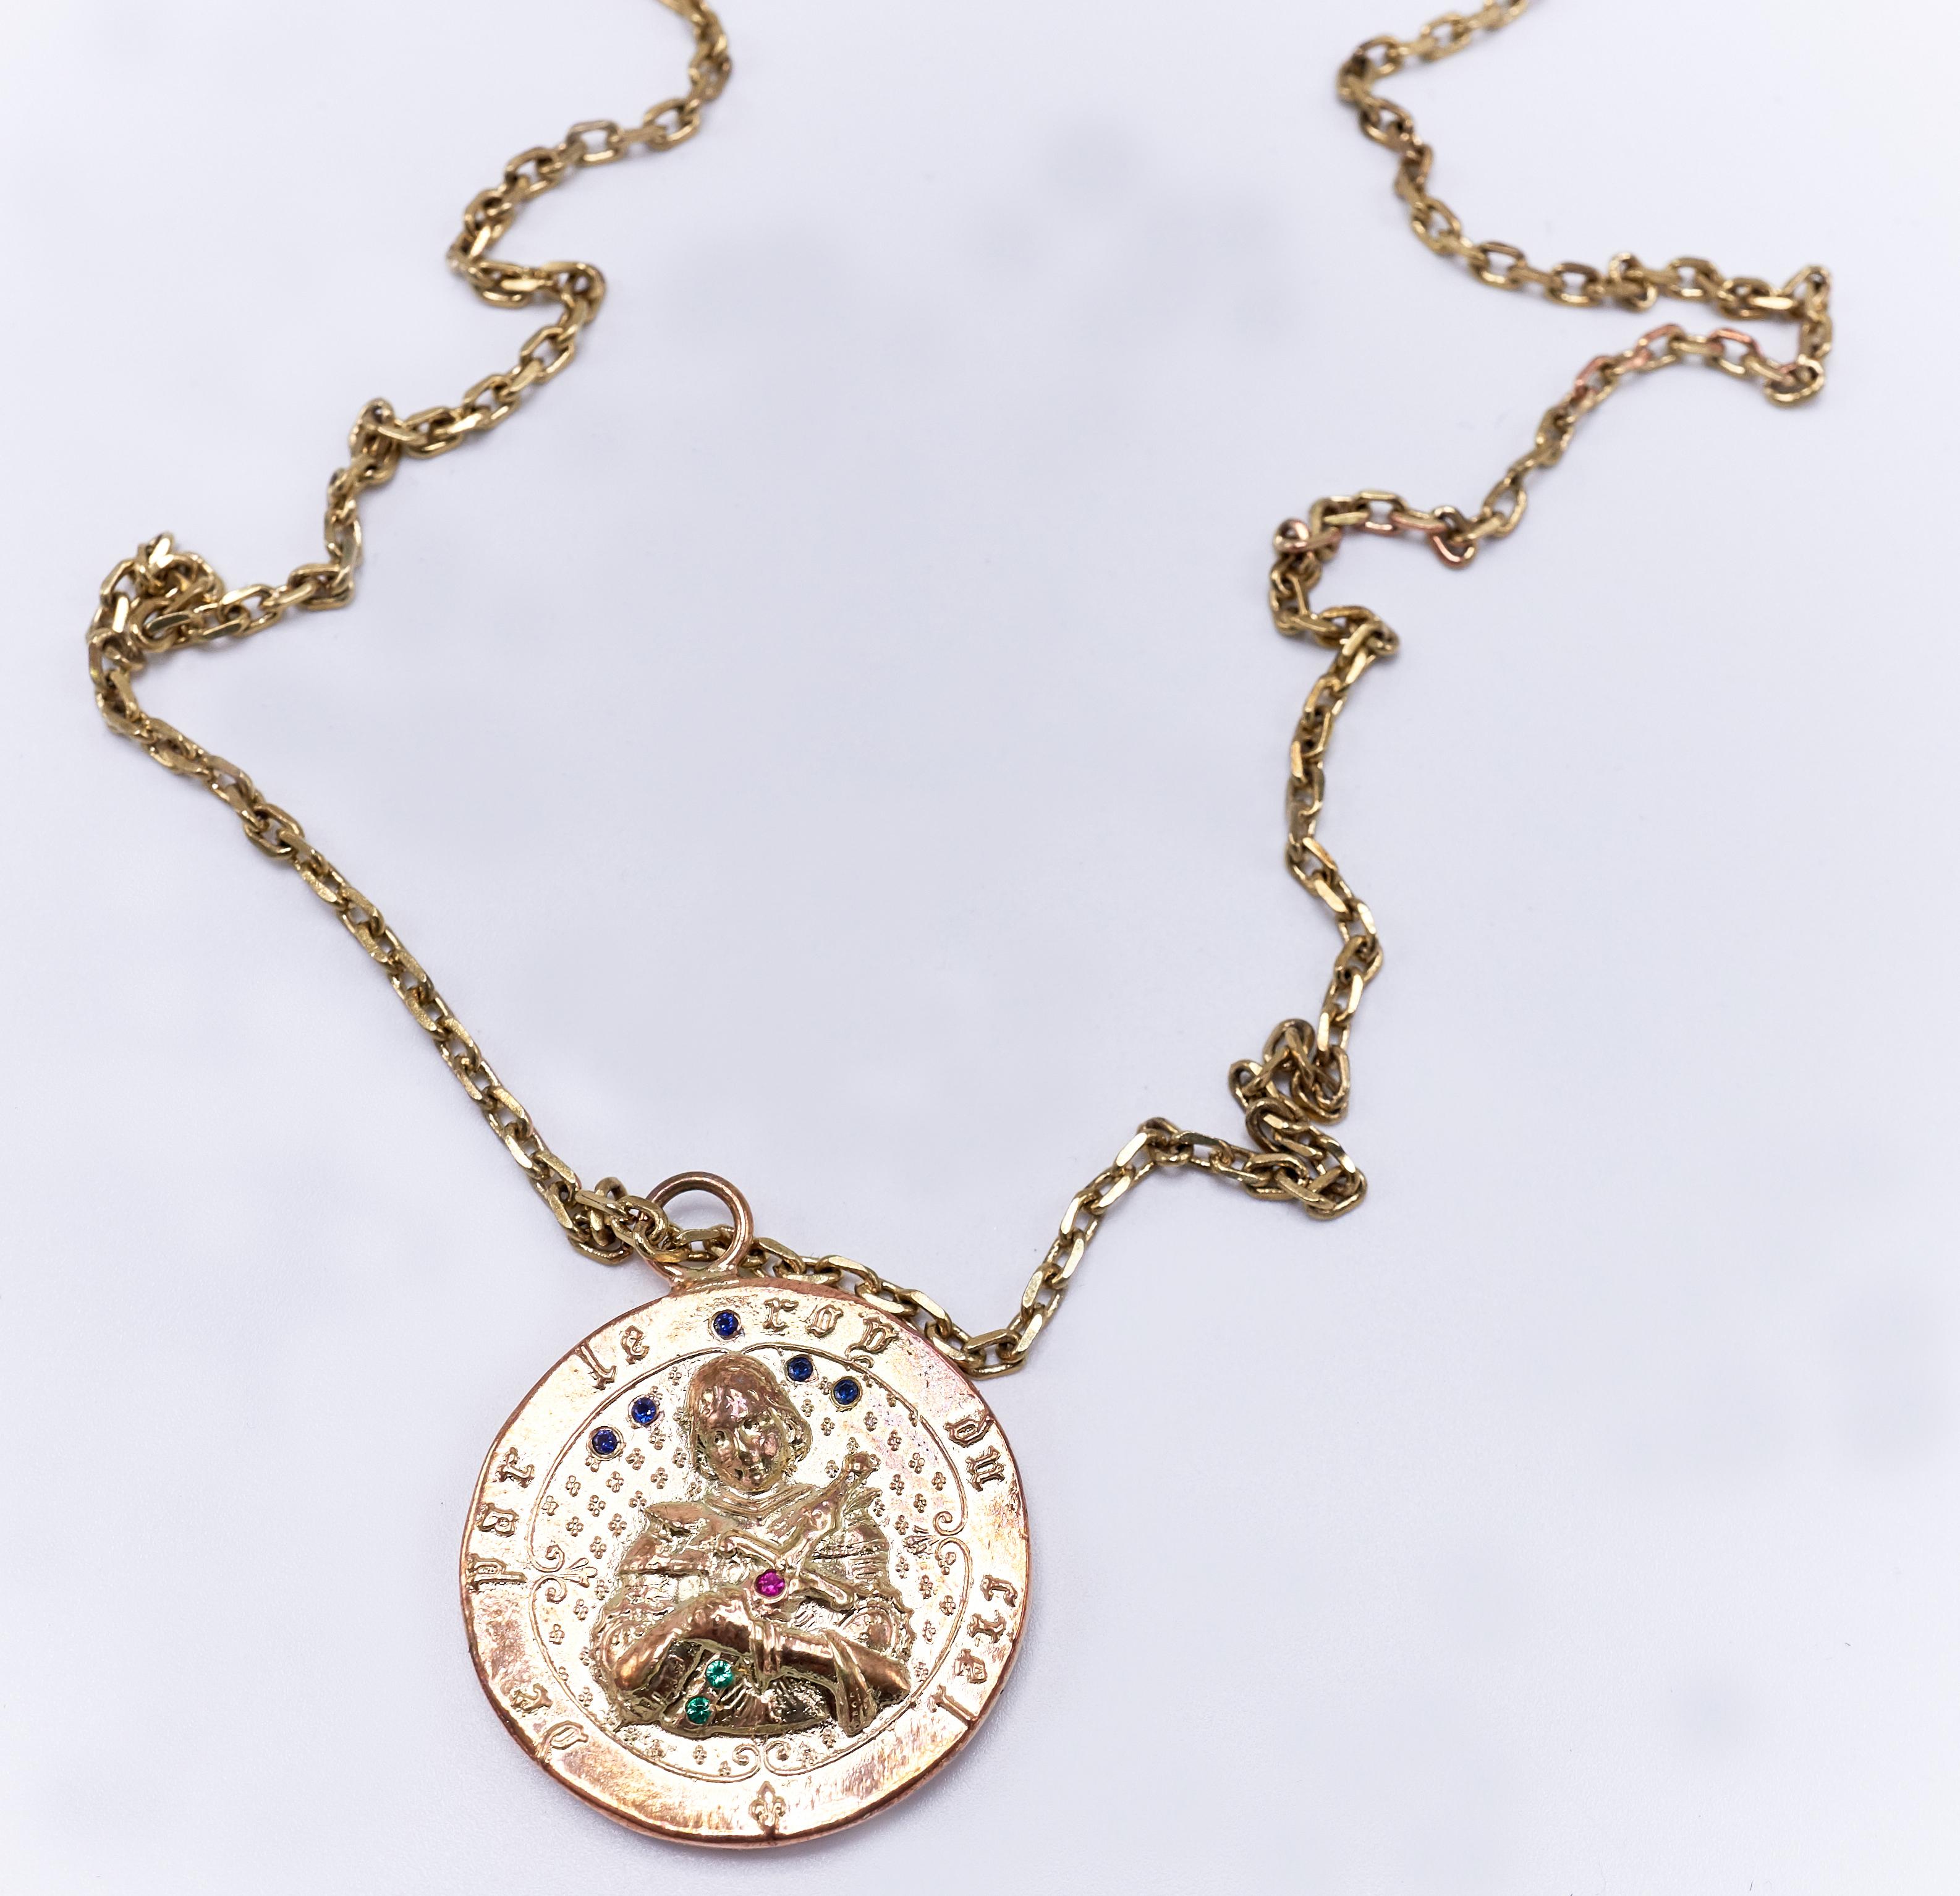 Contemporary Joan of Arc Medal Necklace Ruby Emerald Blue Sapphire J DAUPHIN